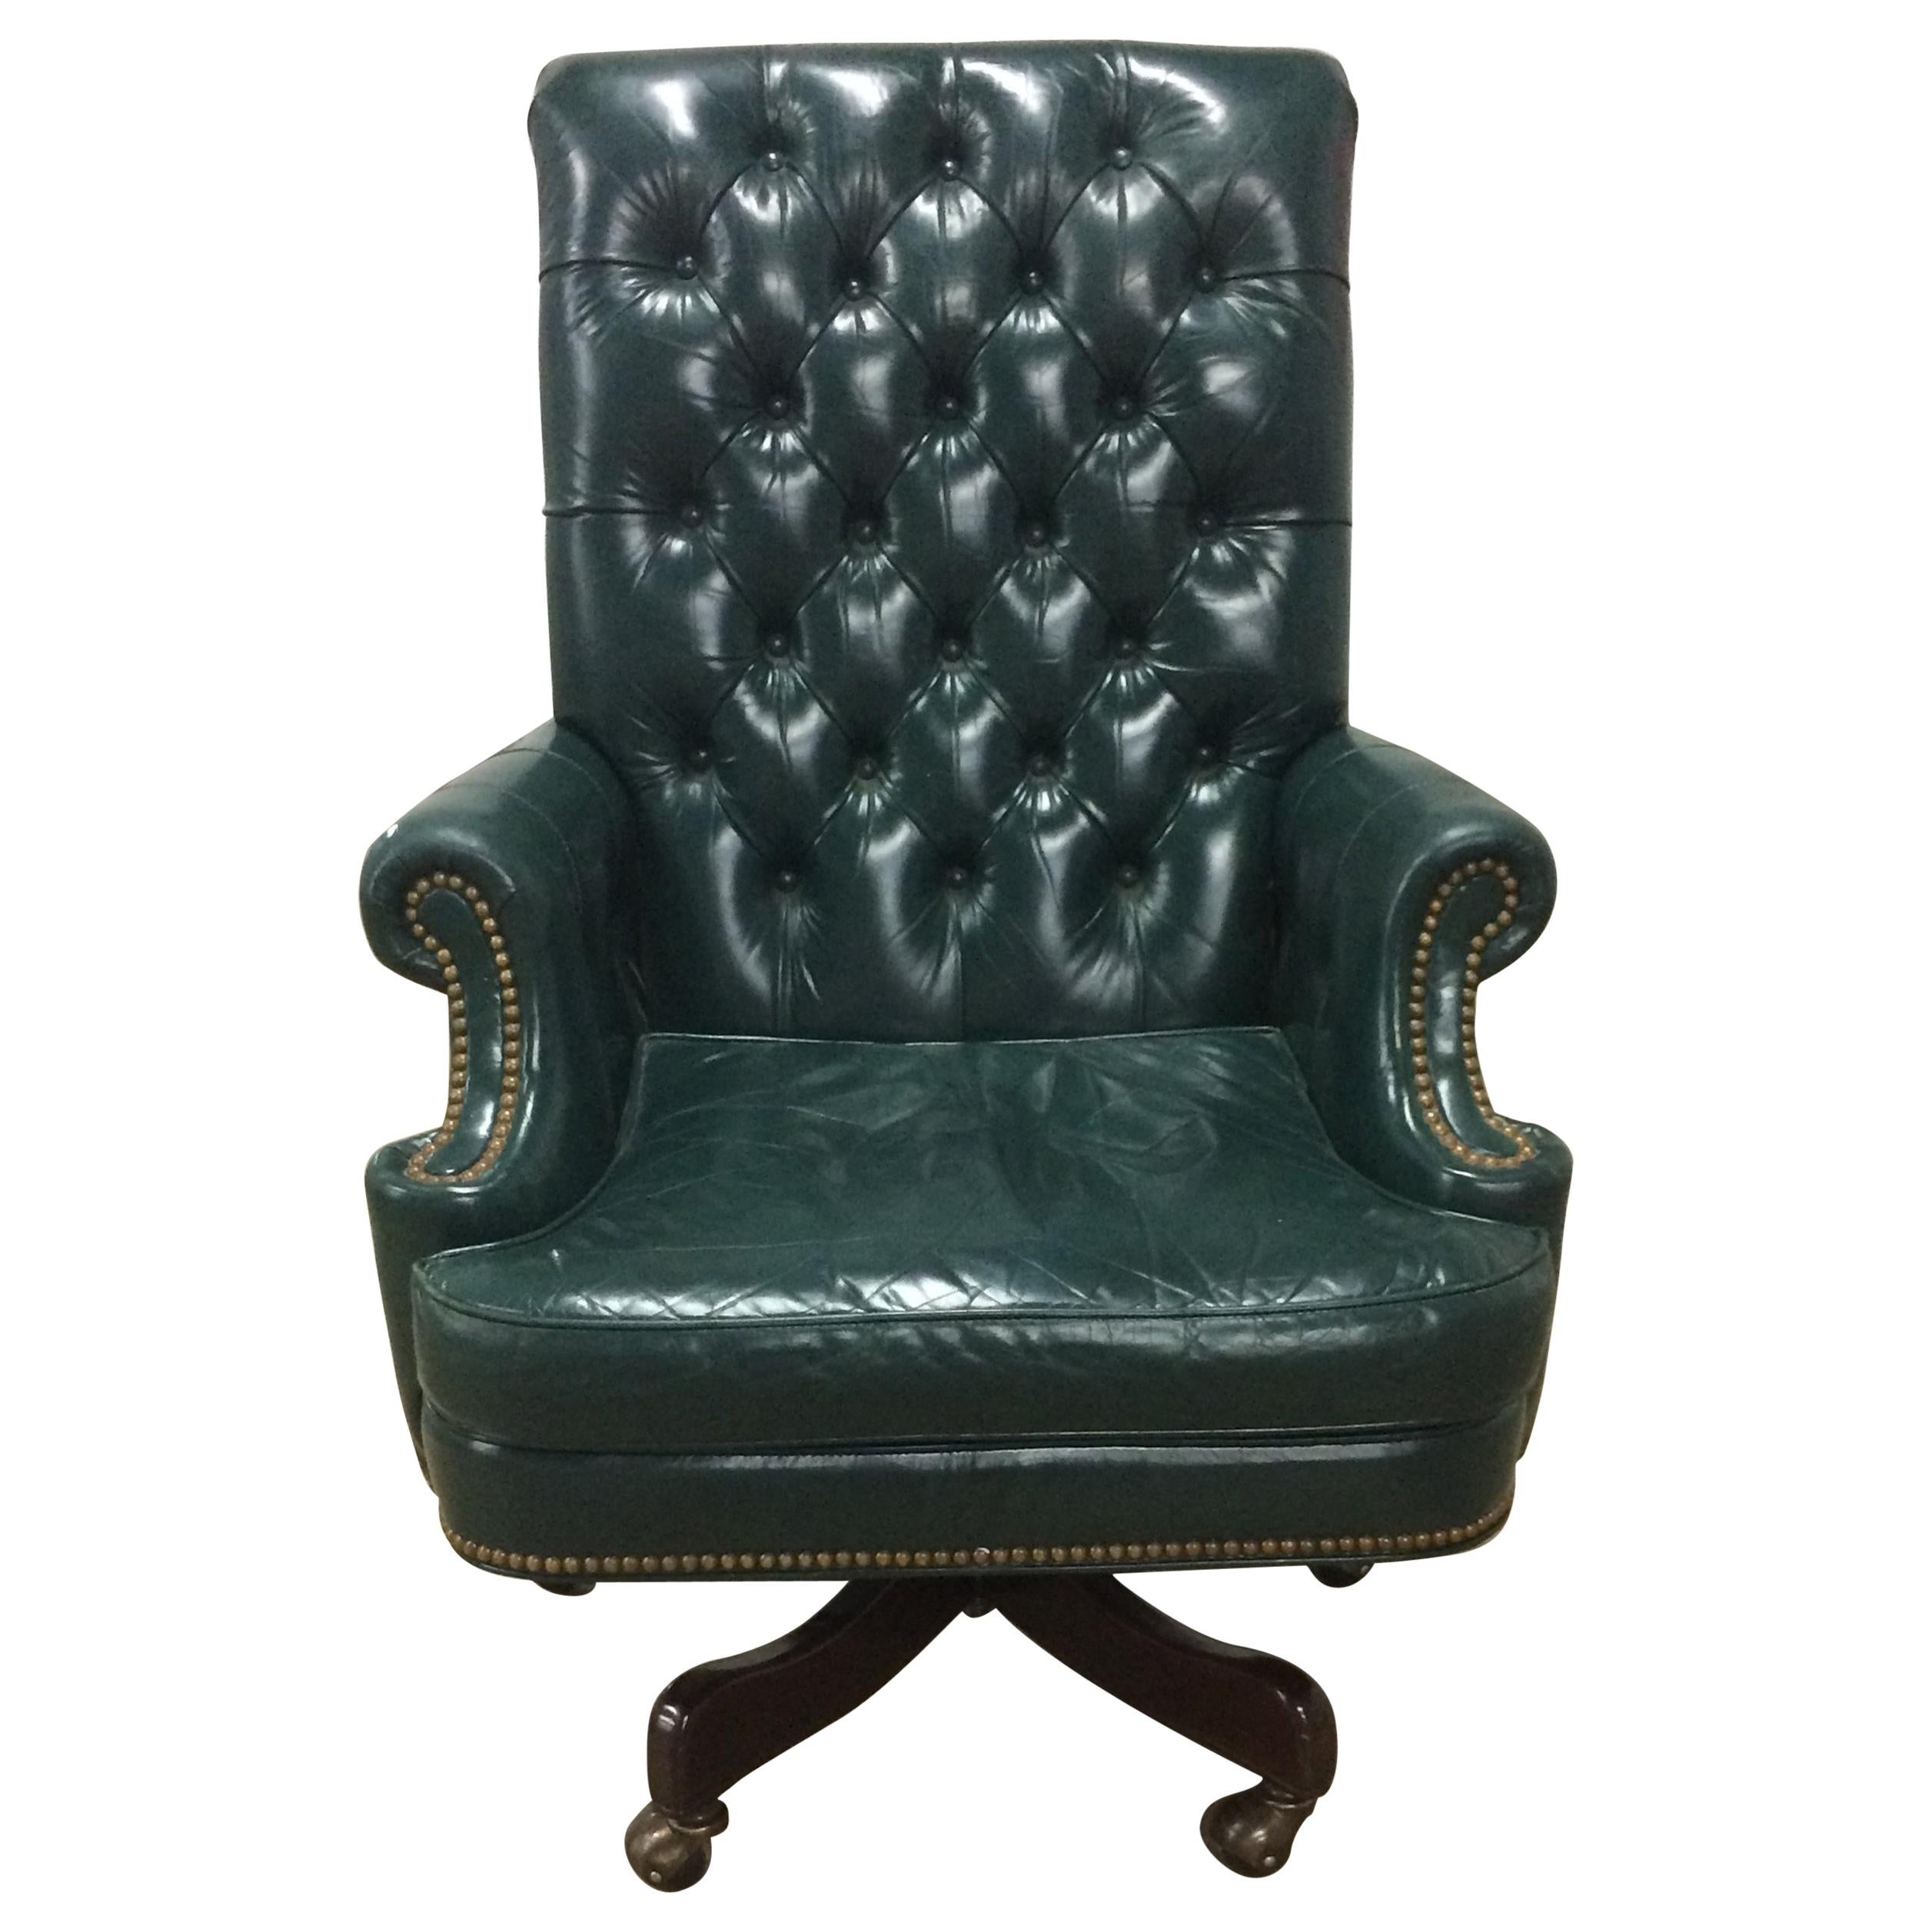 Cabot Wrenn Executive Chair Tufted Green Leather